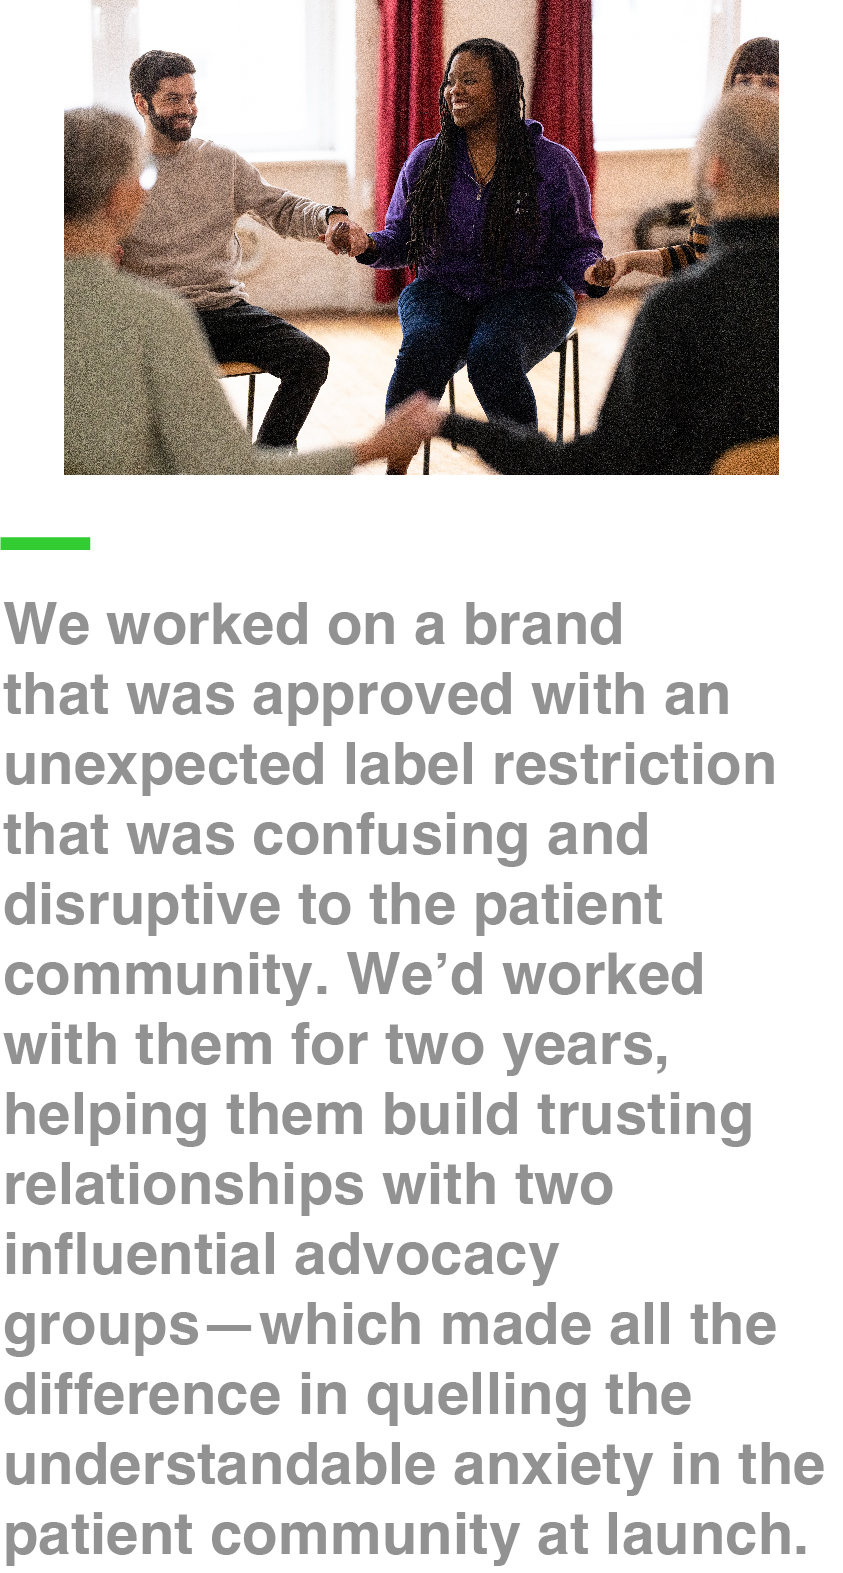 We worked on a brand that was approved with an unexpected label restriction that was confusing and disruptive to the patient community. We’d worked with them for two years, helping them build trusting relationships with two influential advocacy groups—which made all the difference in quelling the understandable anxiety in the patient community at launch.